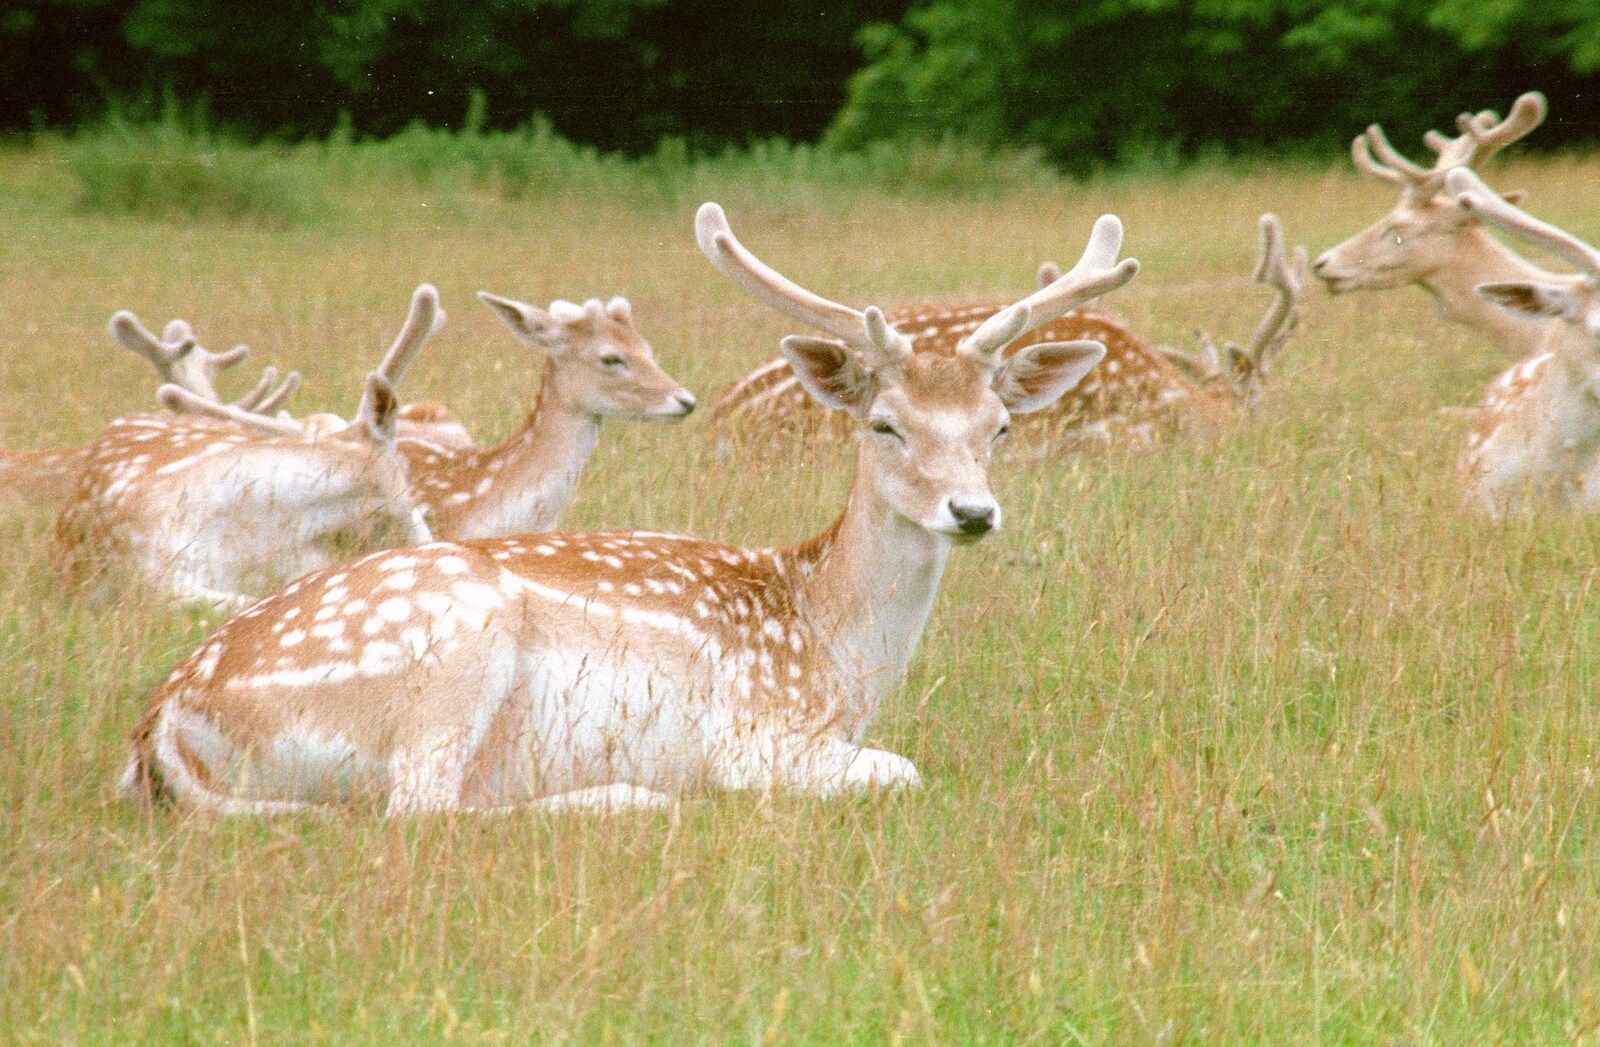 Fallow deer in a park from A Trip to Groombridge, Kent - 10th July 1986